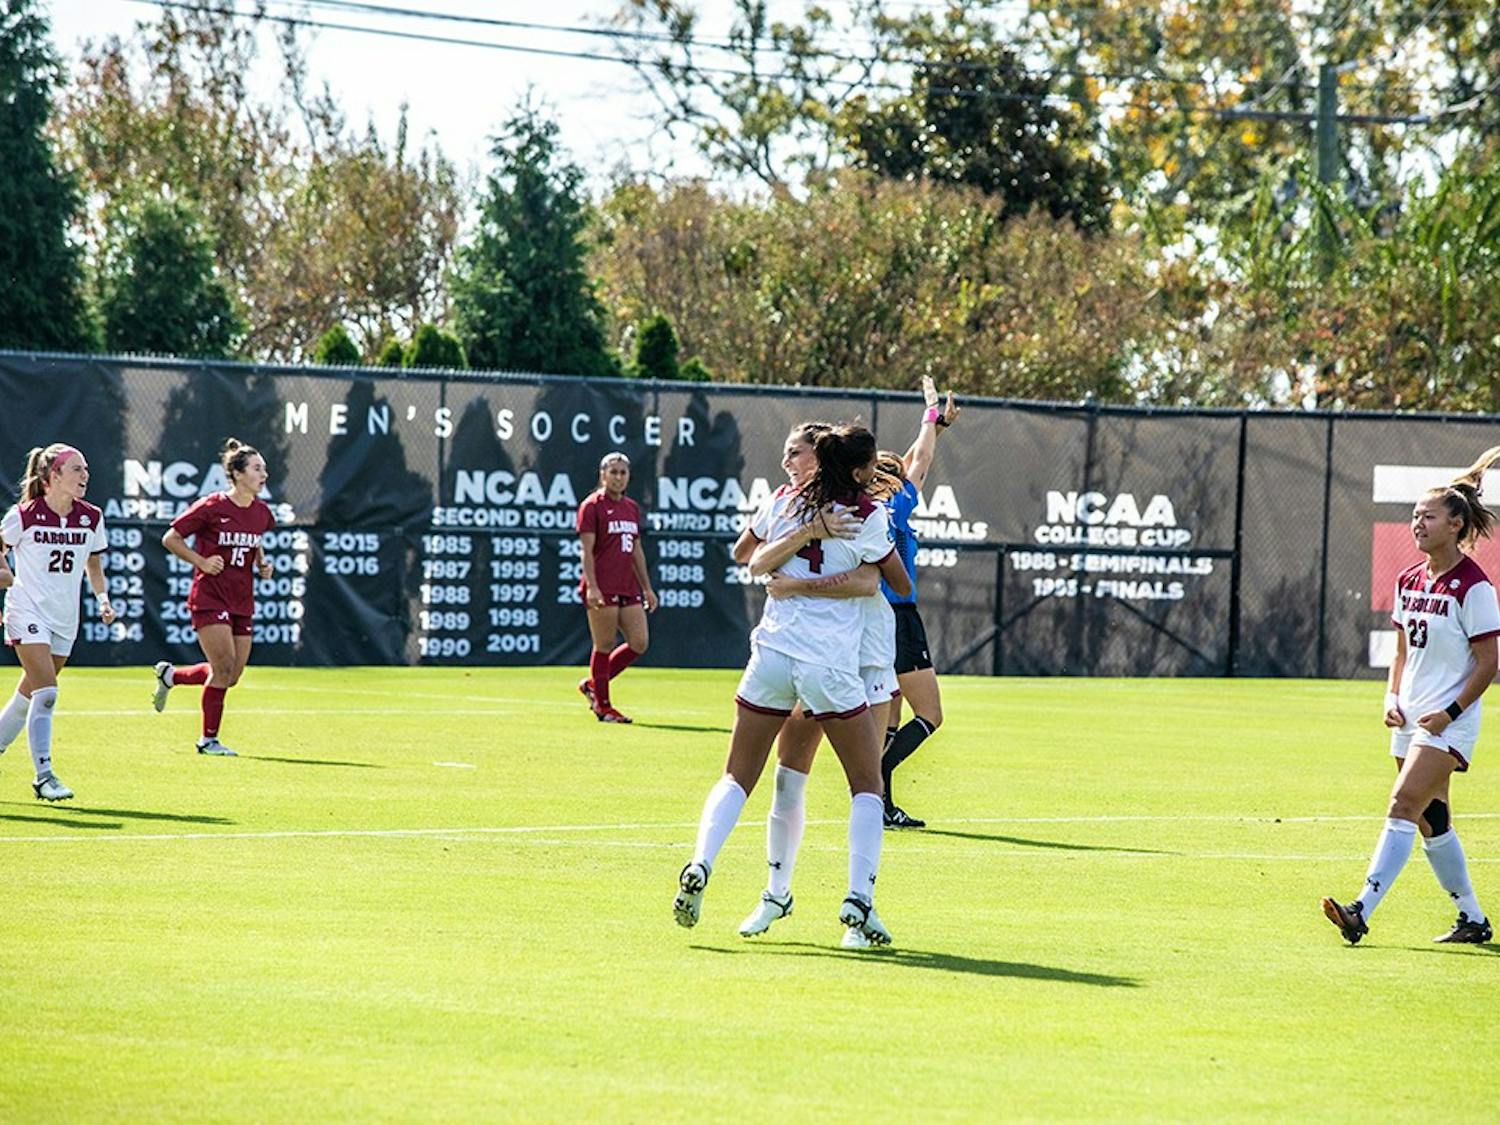 Graduate defender Remi Swartz and graduate forward Ryan Gareis after scoring against Alabama on Oct. 24. The South Carolina women's soccer team won 2-0 against Penn State to reach the Elite Eight in the NCAA Tournament.&nbsp;